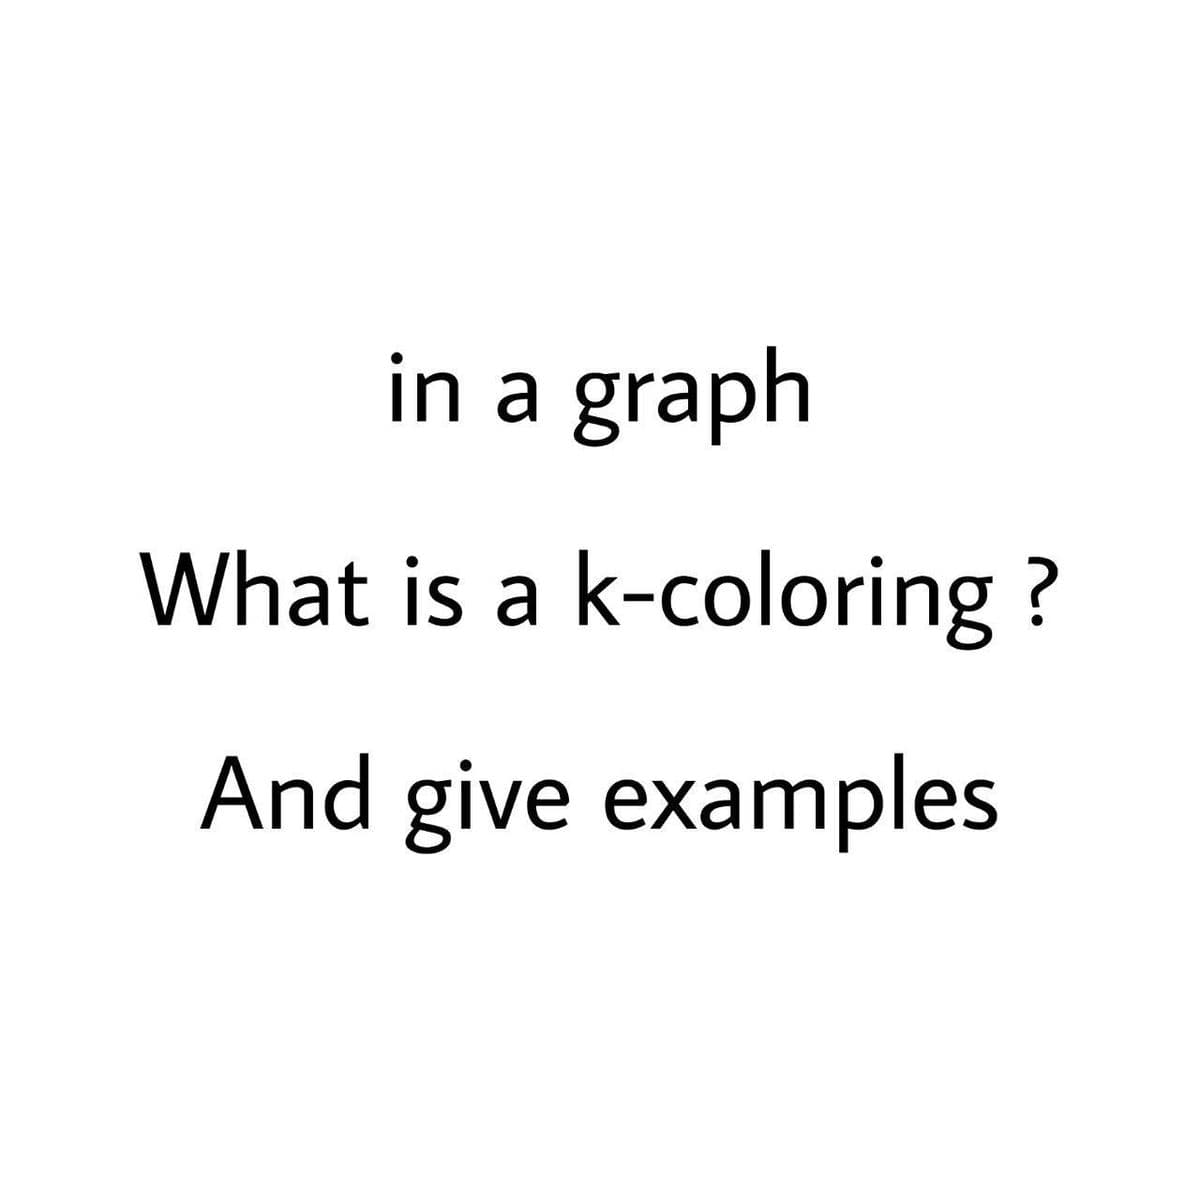 in a graph
What is a k-coloring?
And give examples